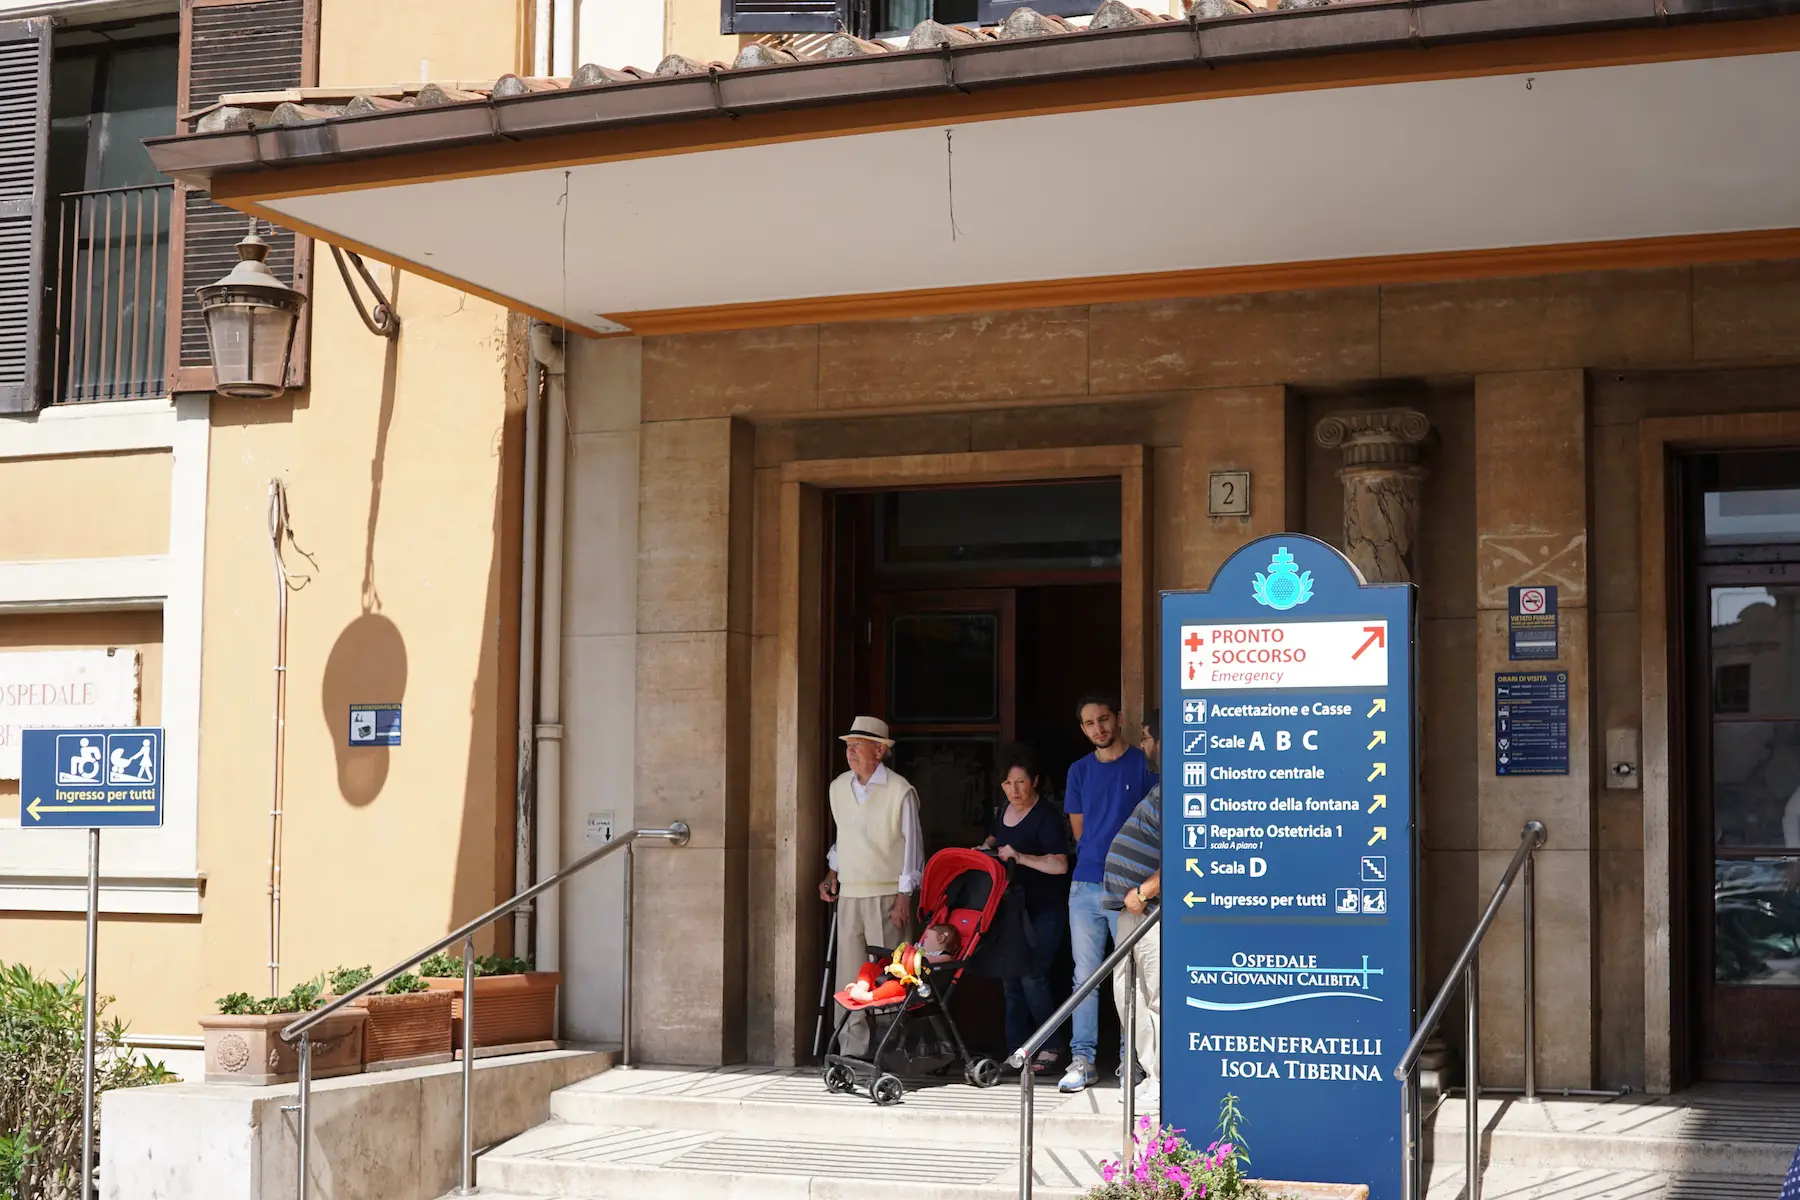 A family walks out the doors of Ospedale San Giovanni Calibita in Rome, Italy